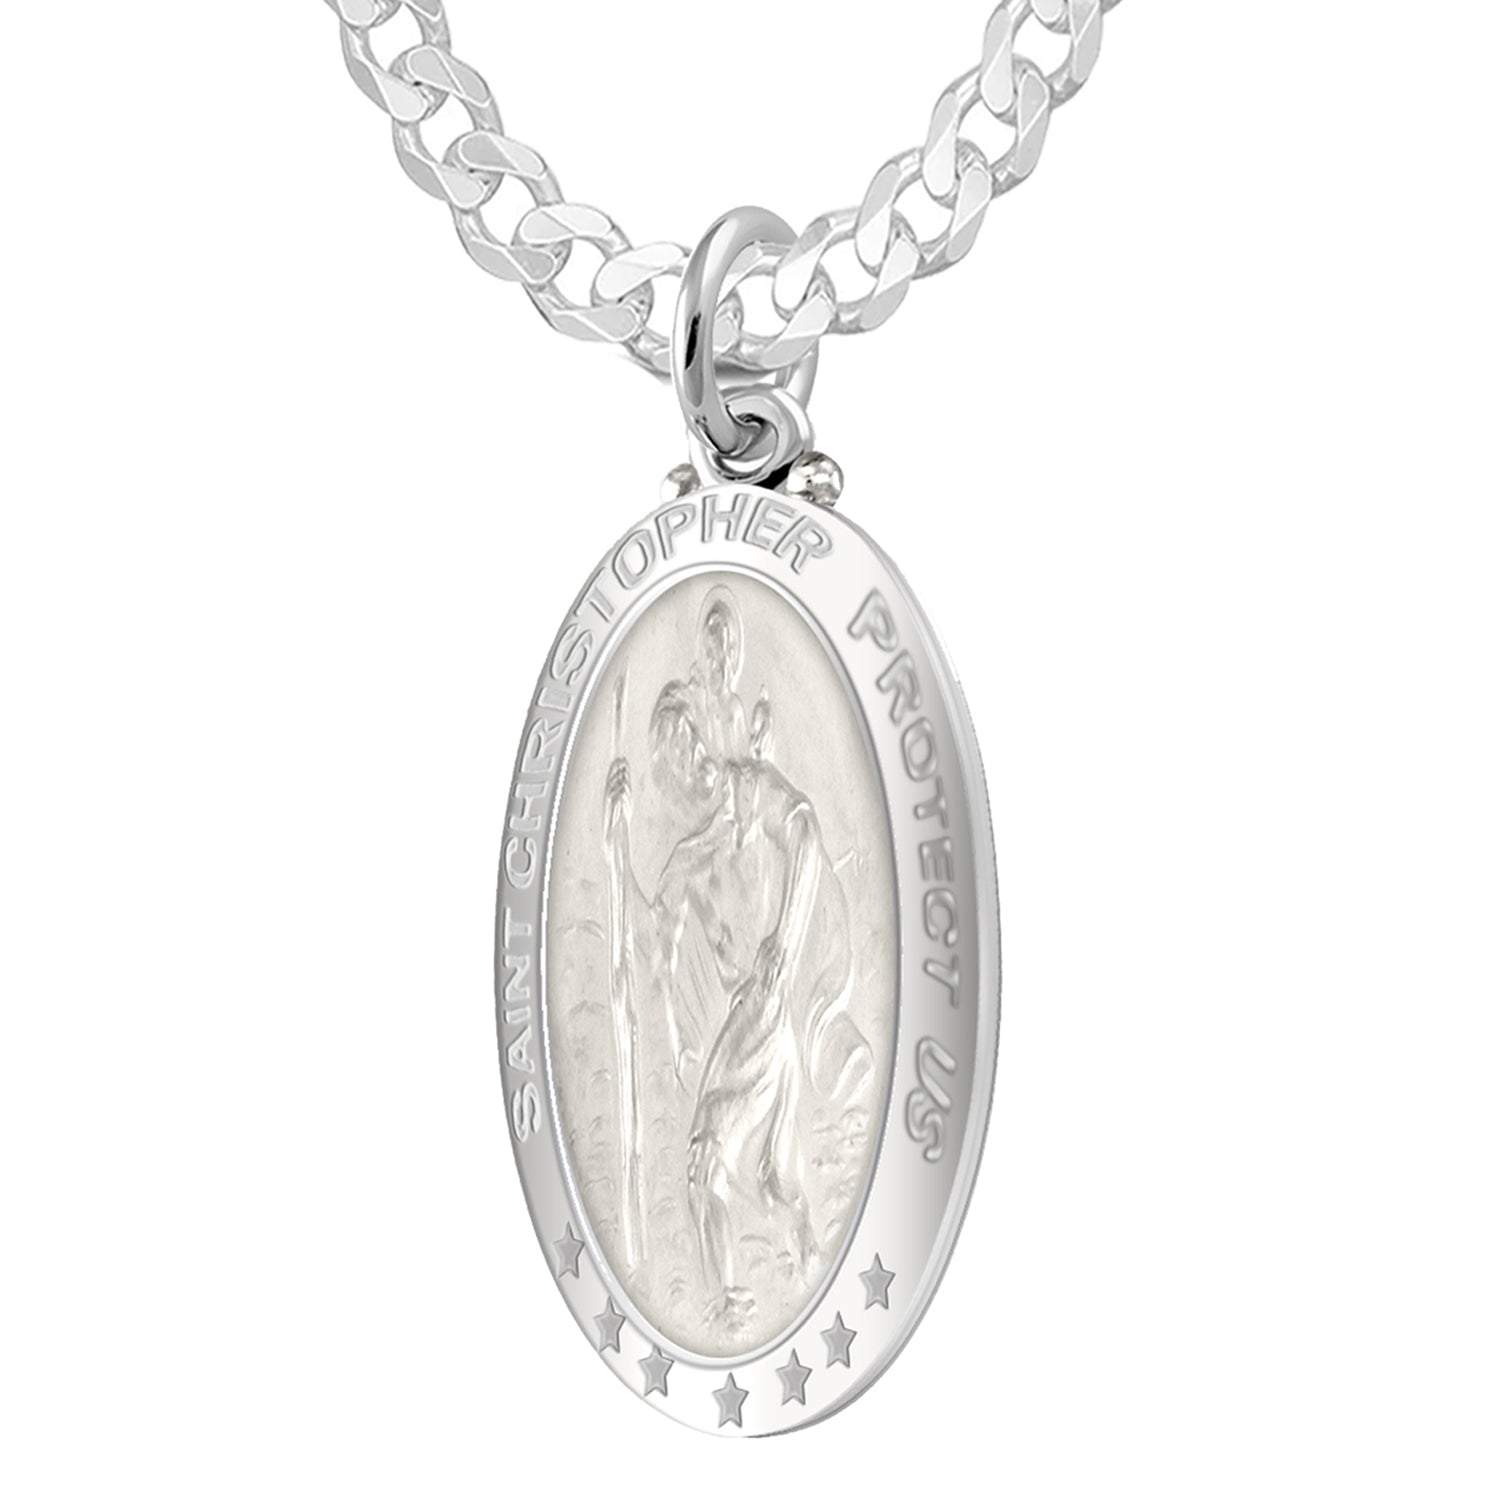 The Saint Christopher Protect US Oval Sterling Silver Pendant Necklace